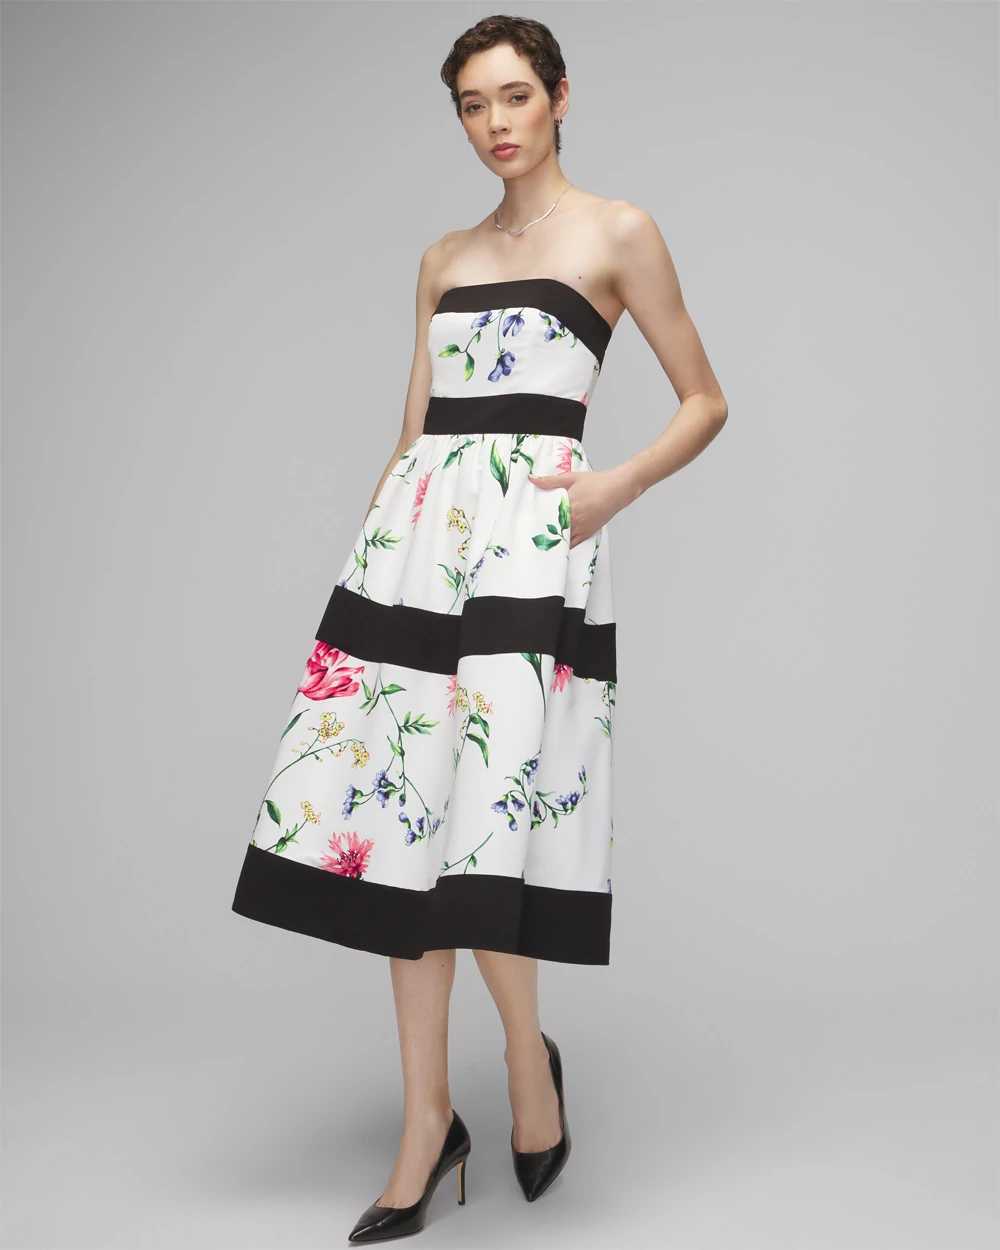 Strapless Floral Contrast Fit & Flare Dress click to view larger image.